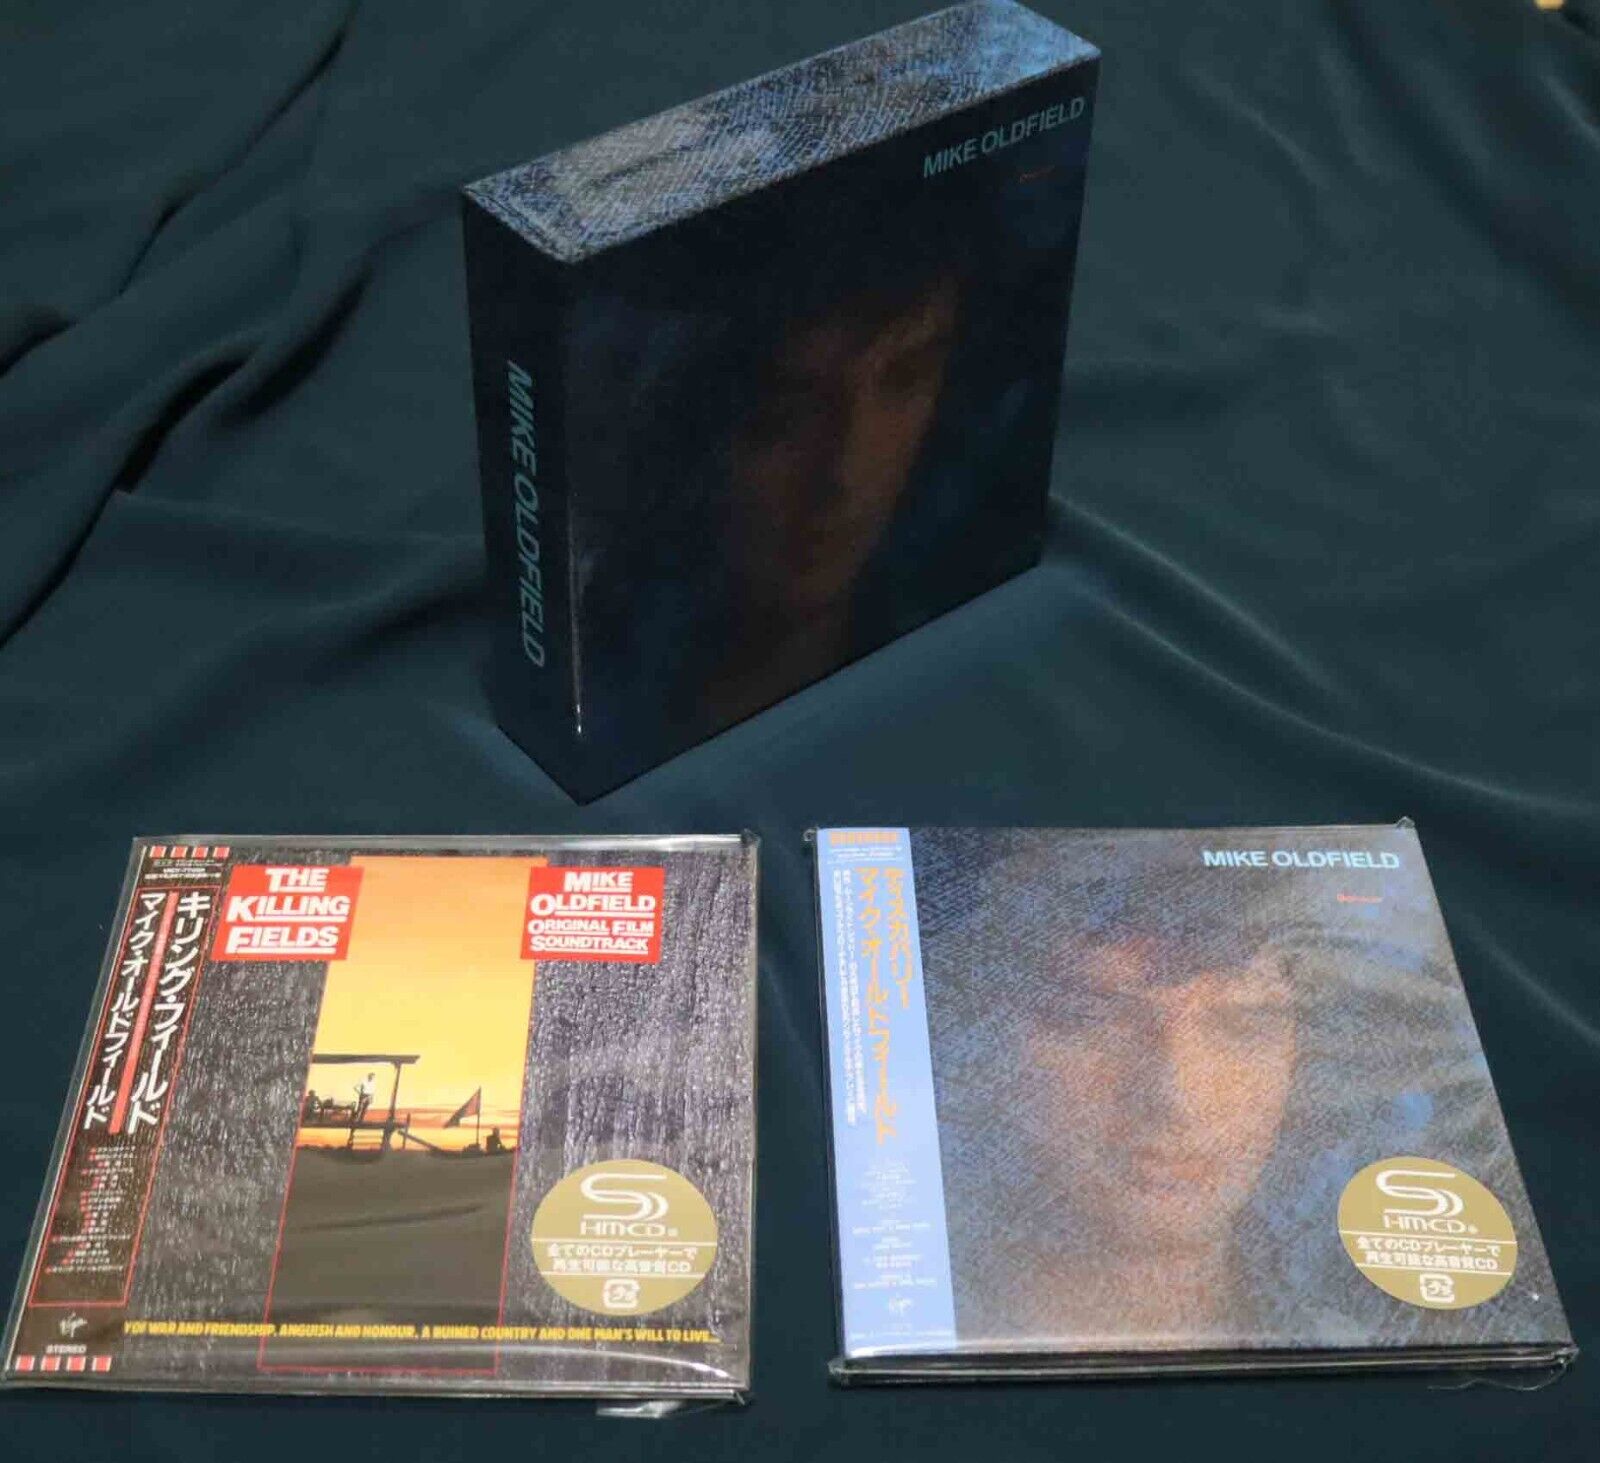 MIKE OLDFIELD JAPAN 2 SHM CD PROMO BOX SET UICY 77688~89 OBI DVD DELUXE EDITION